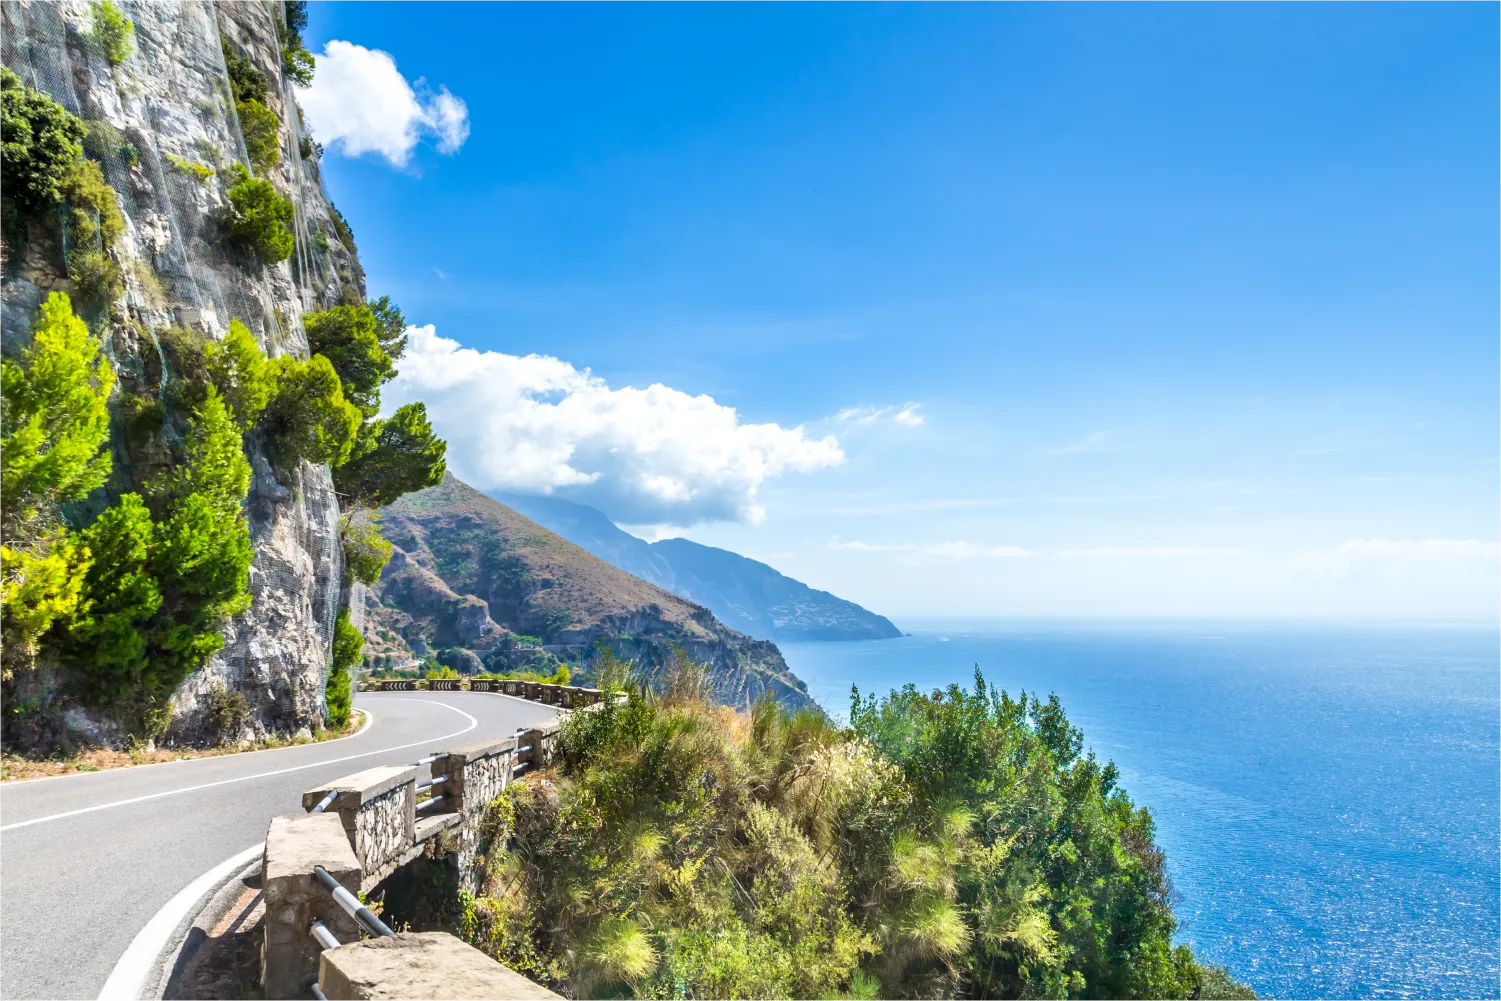 scenic road along the Amalfi Coast with mountains on one side and the sea on the other